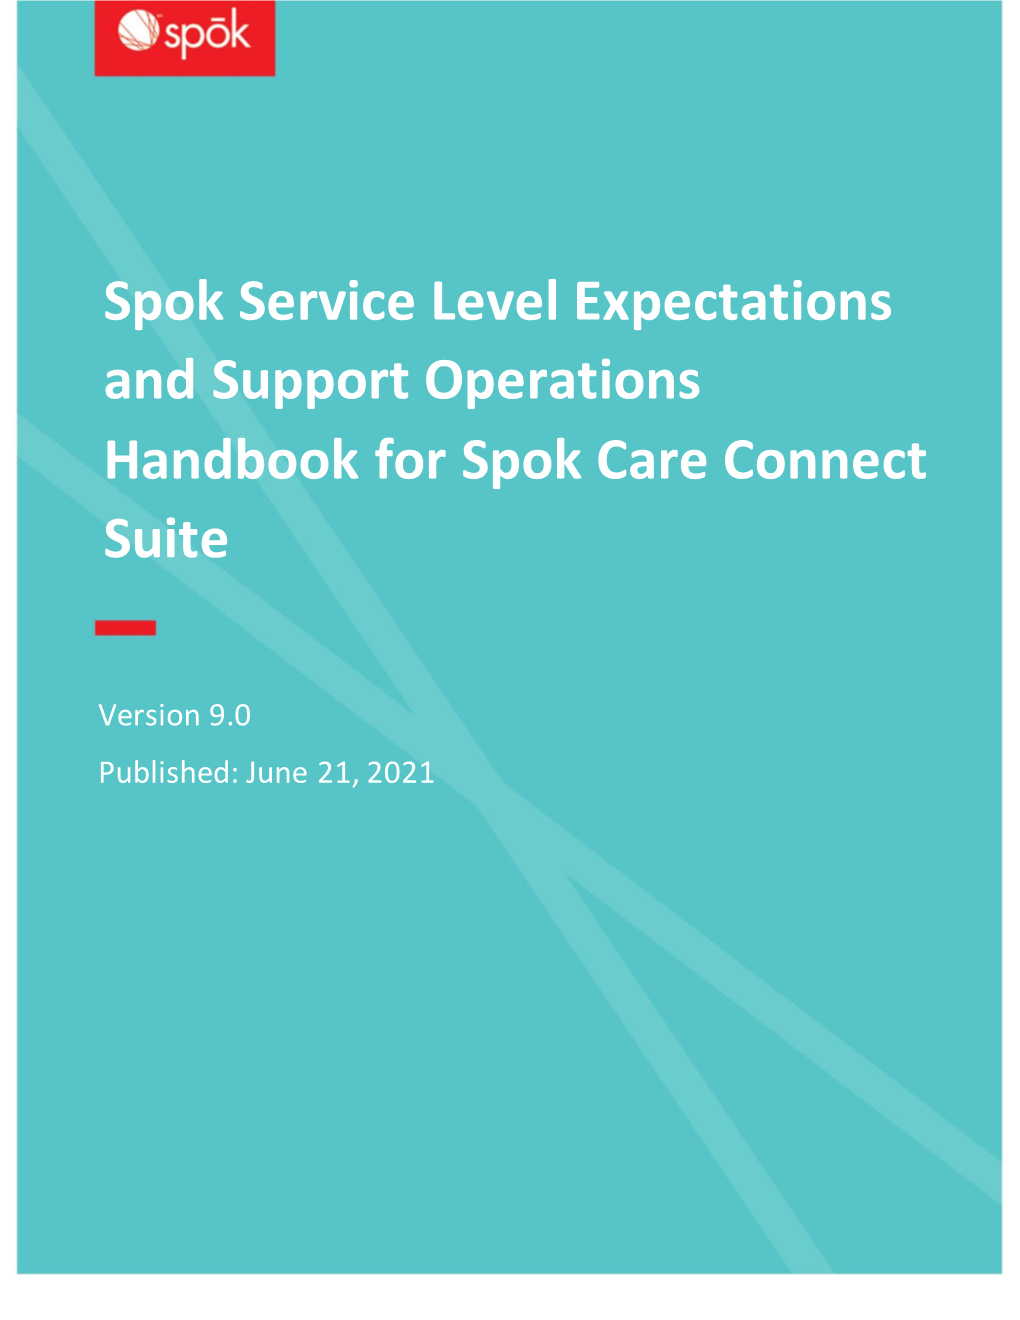 Spok Service Level Expectations and Support Operations Handbook for Spok Care Connect Suite